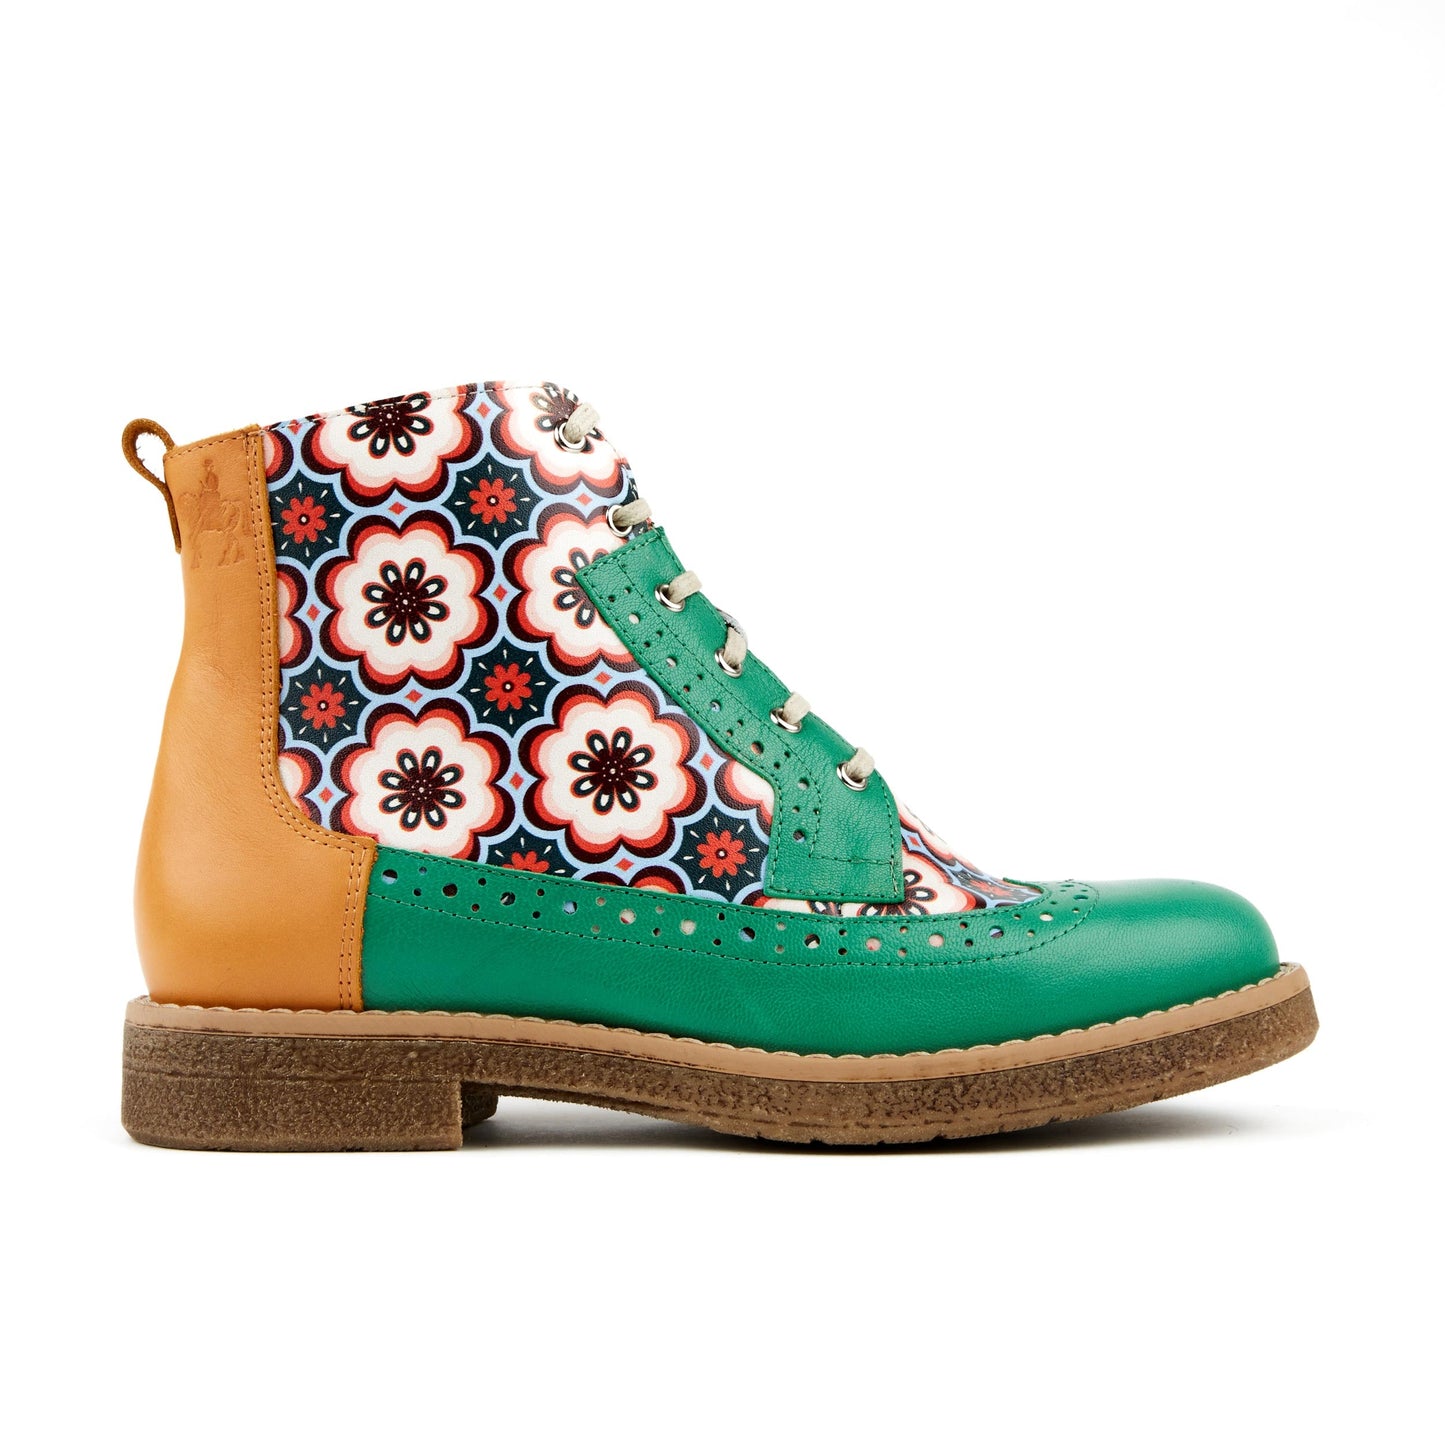 Hatter - Daisy Chain Green & Yellow Ankle Boots Embassy London 